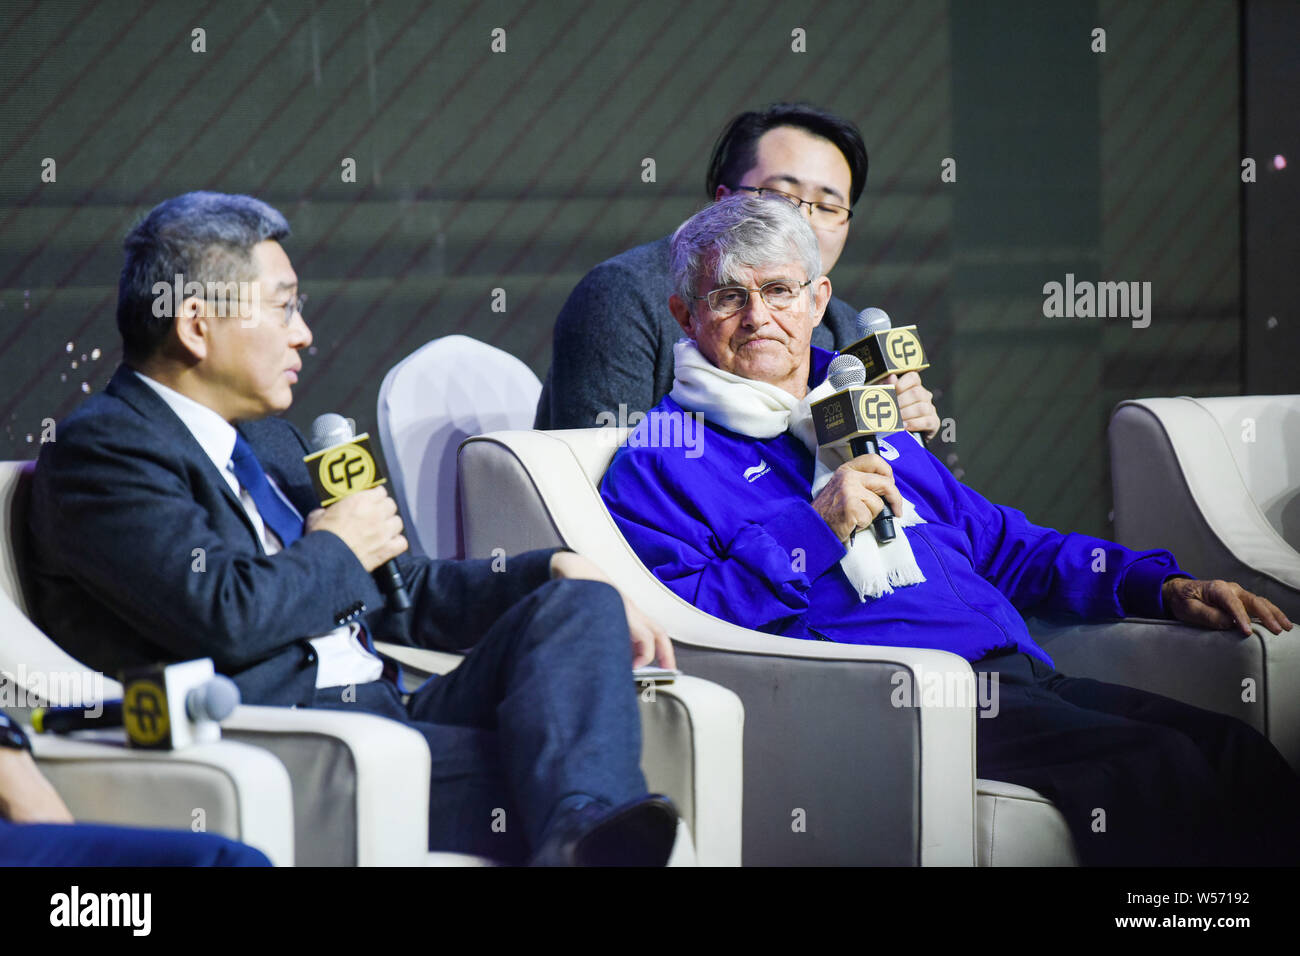 Serbian football coach and former player Bora Milutinovic, right, attends the Chinese Football And Esports Forum during the 2018 Chinese Footballer of Stock Photo